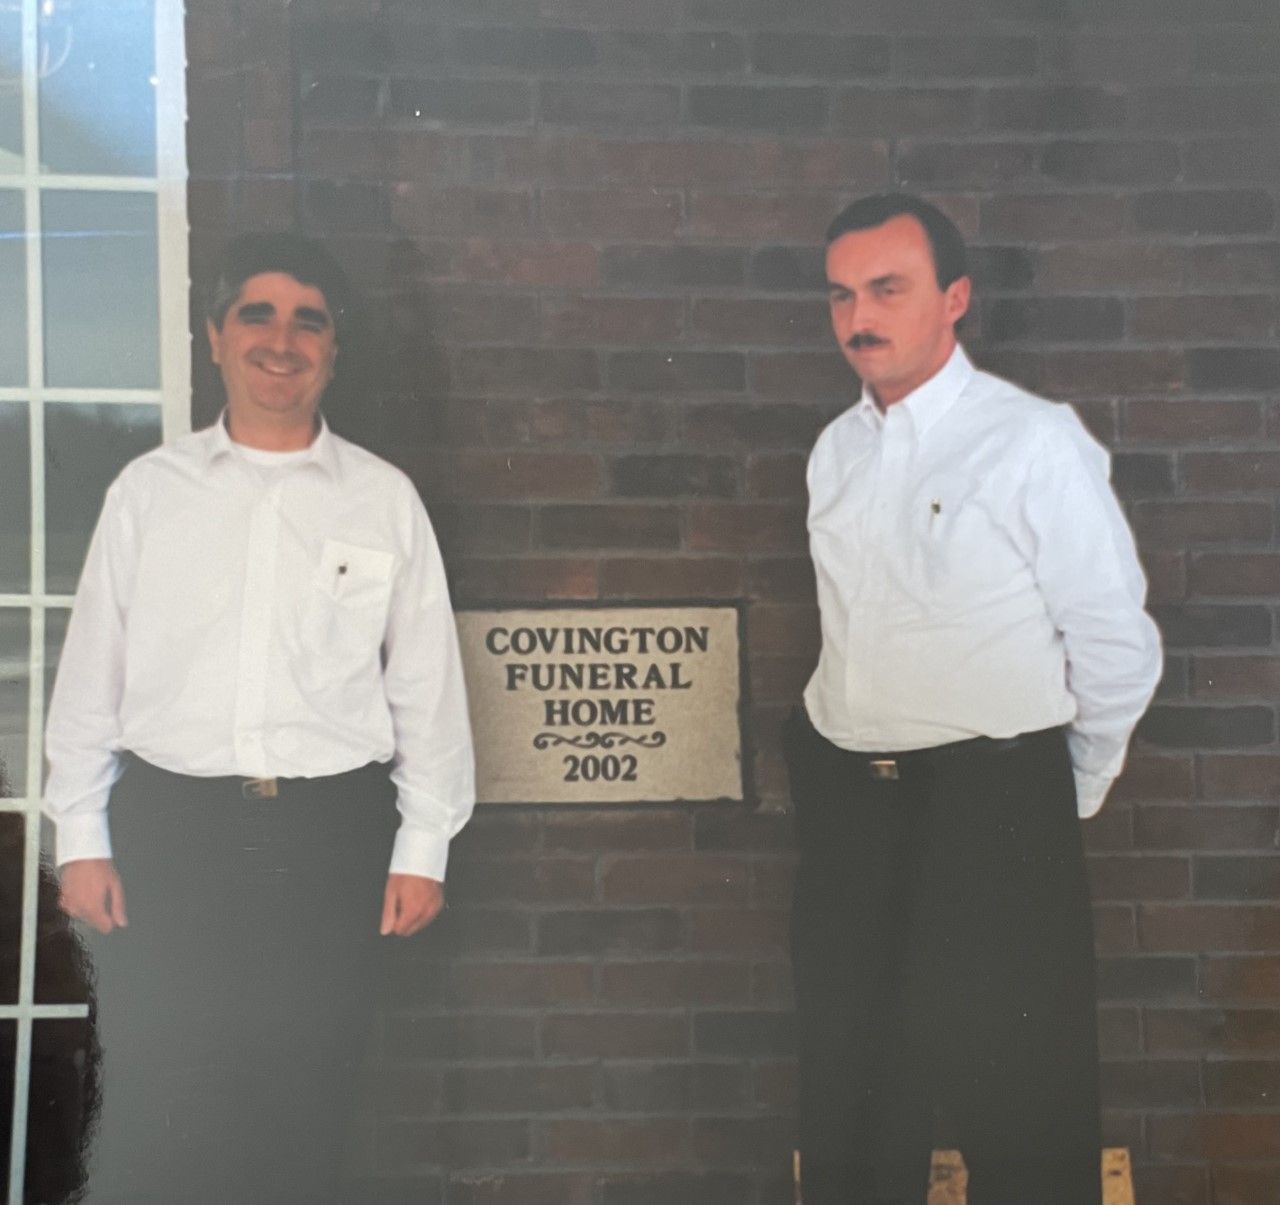 Historical Photo of Covington Funeral Home Staff